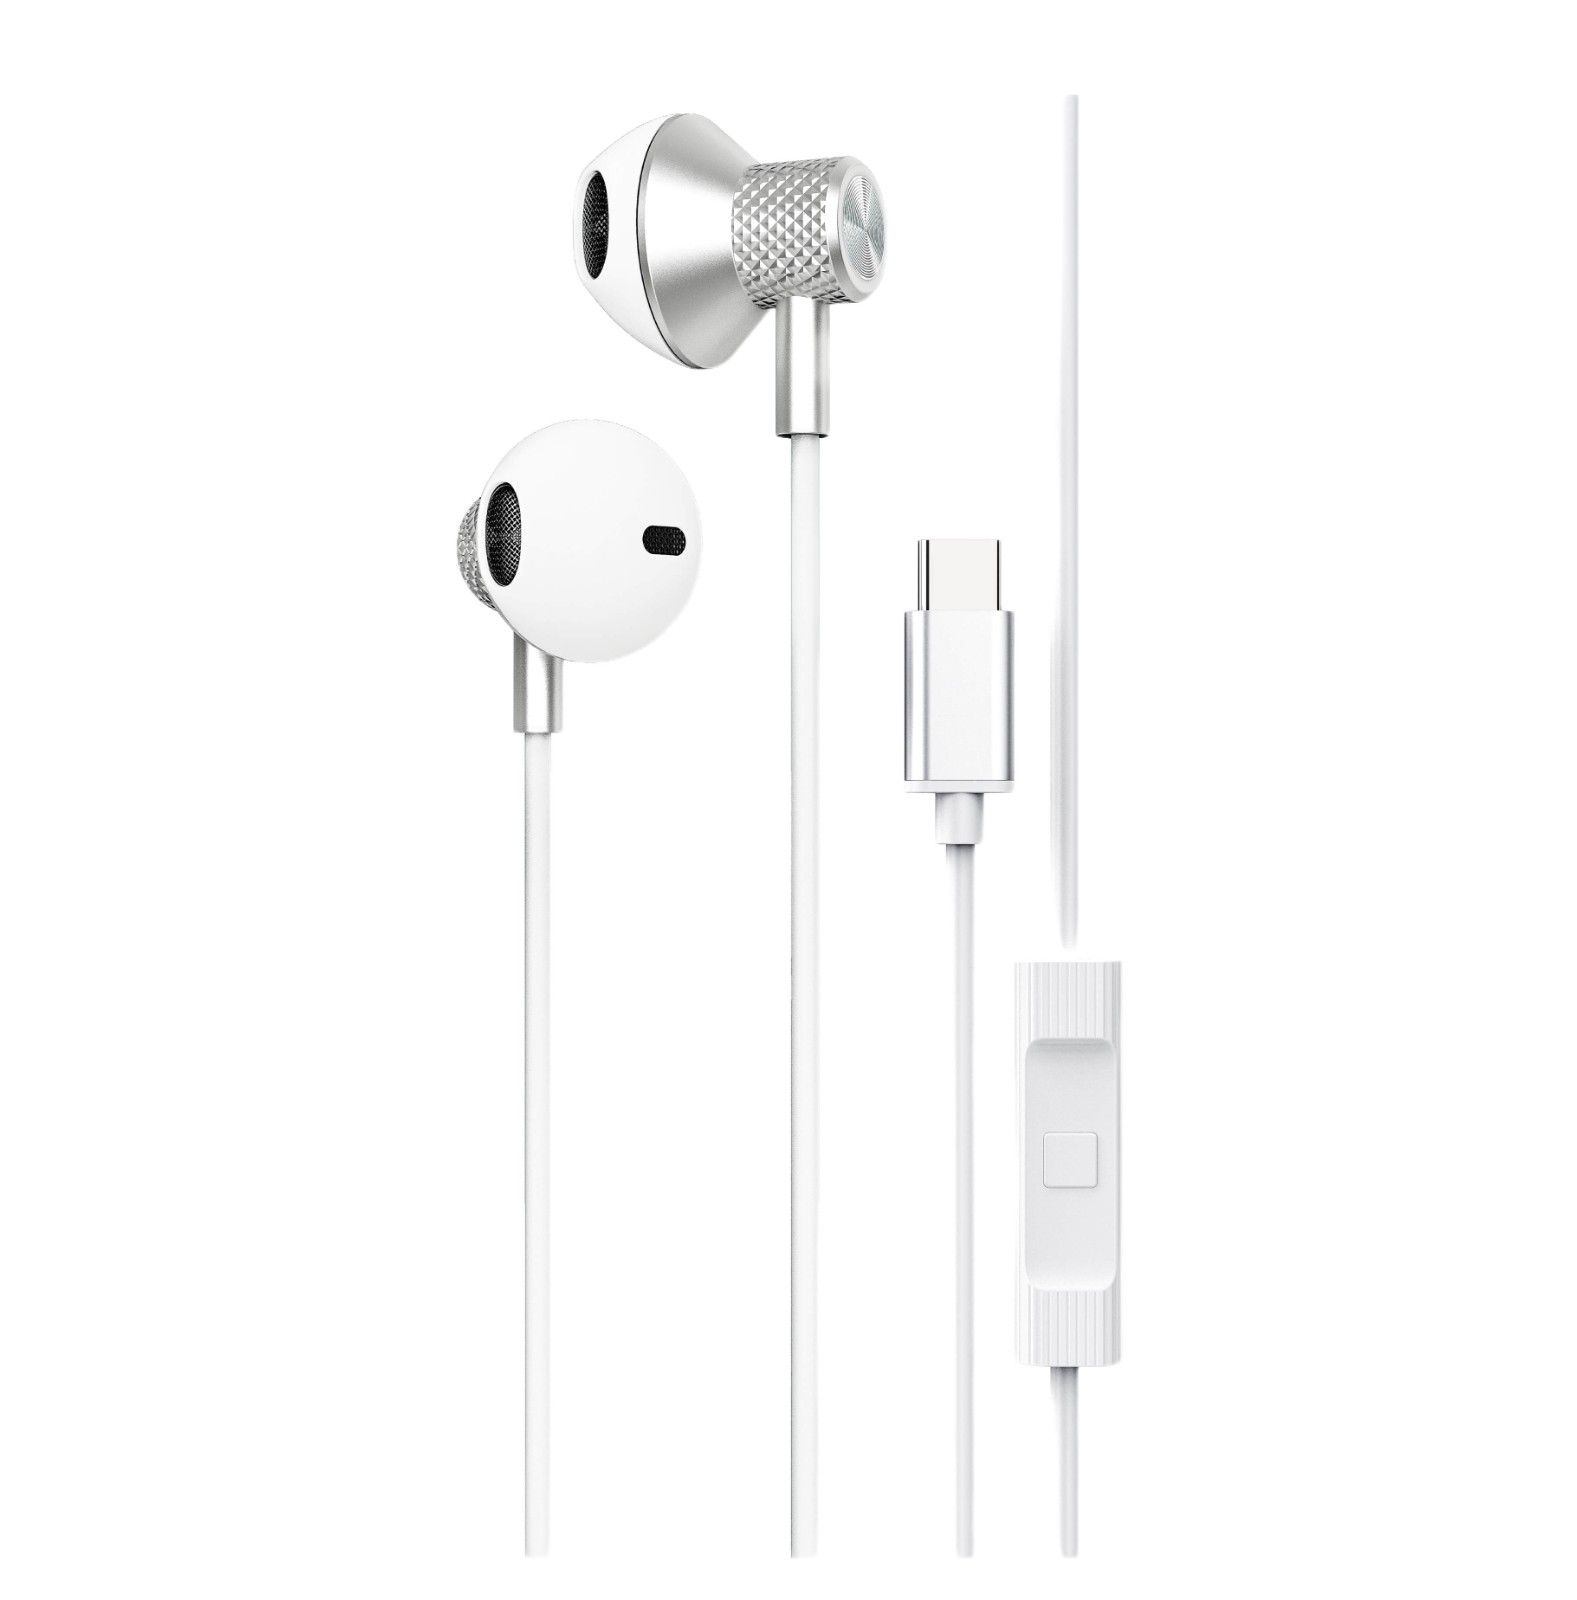 LS-730 In-ear Wired Earphone HiFi Headphones With Subwoofer Earbuds Earphones TYPE-C Music Sports Gaming Headset With Mic White